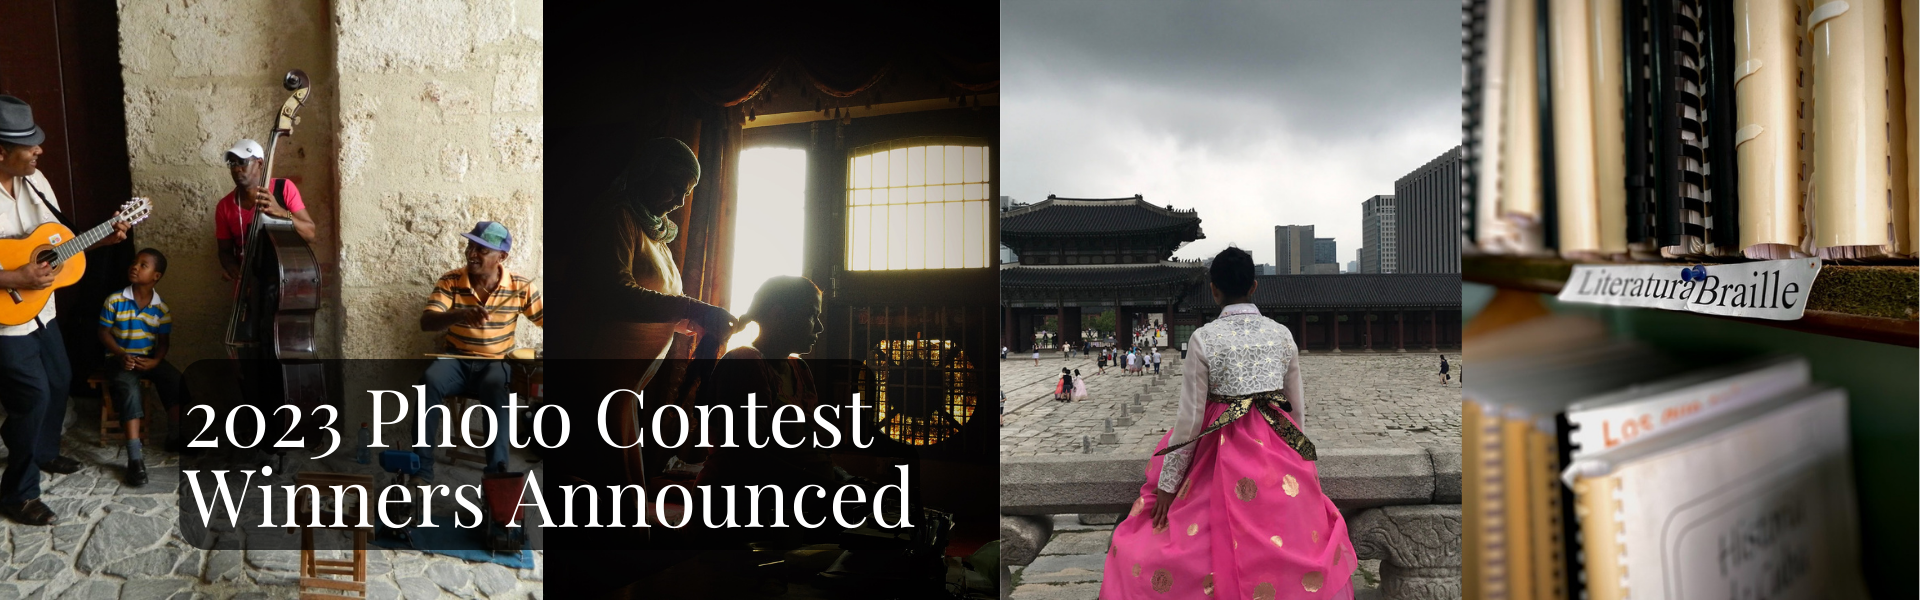 2023 Photo Contest Winners Announced